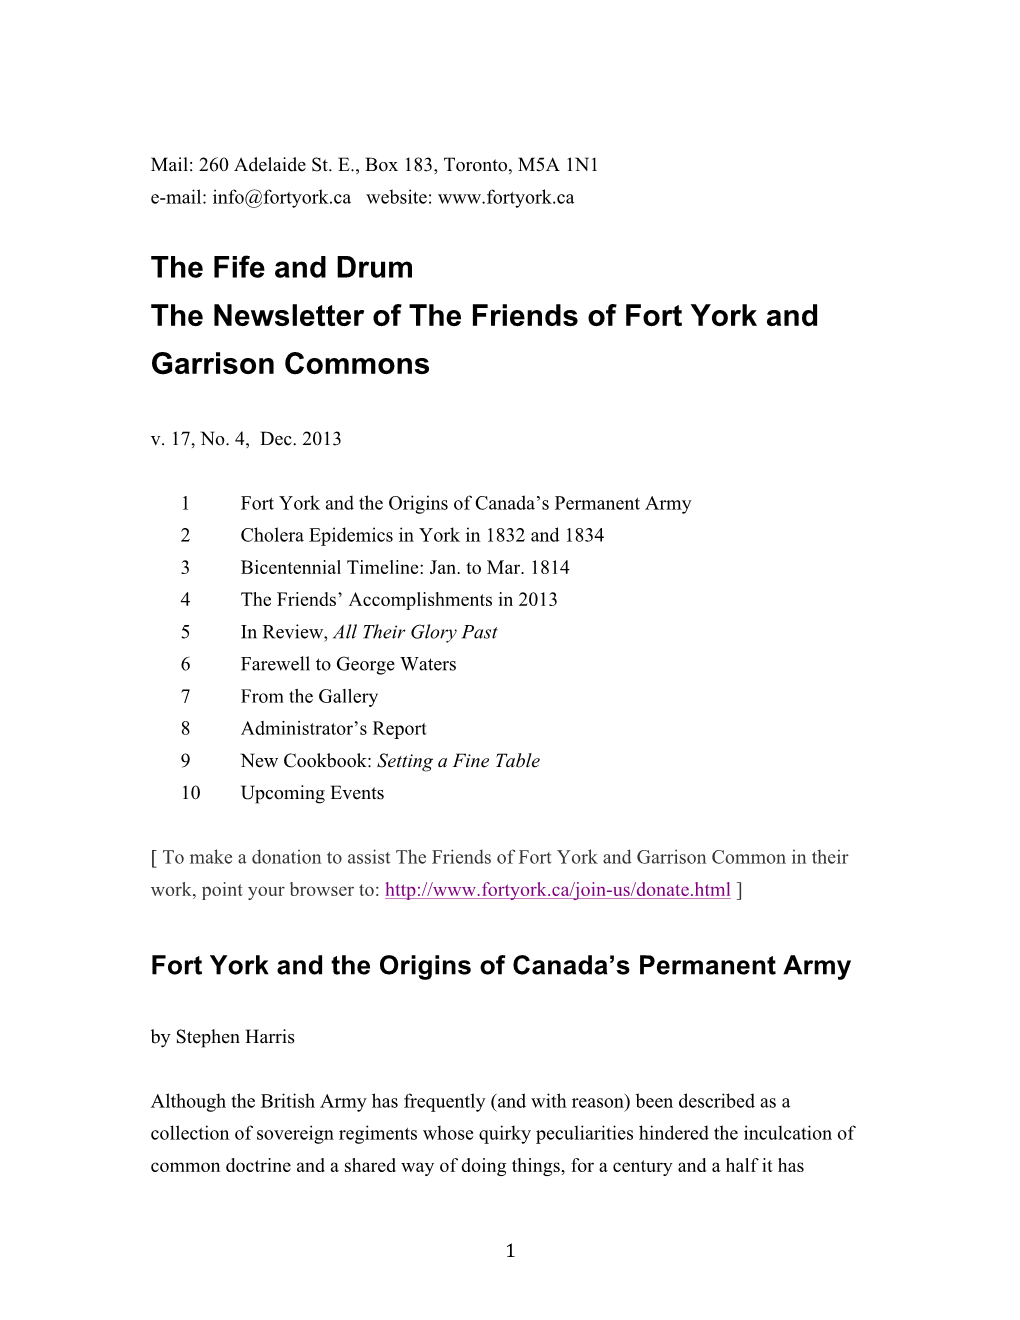 The Fife and Drum Dec 2013 Reformatted